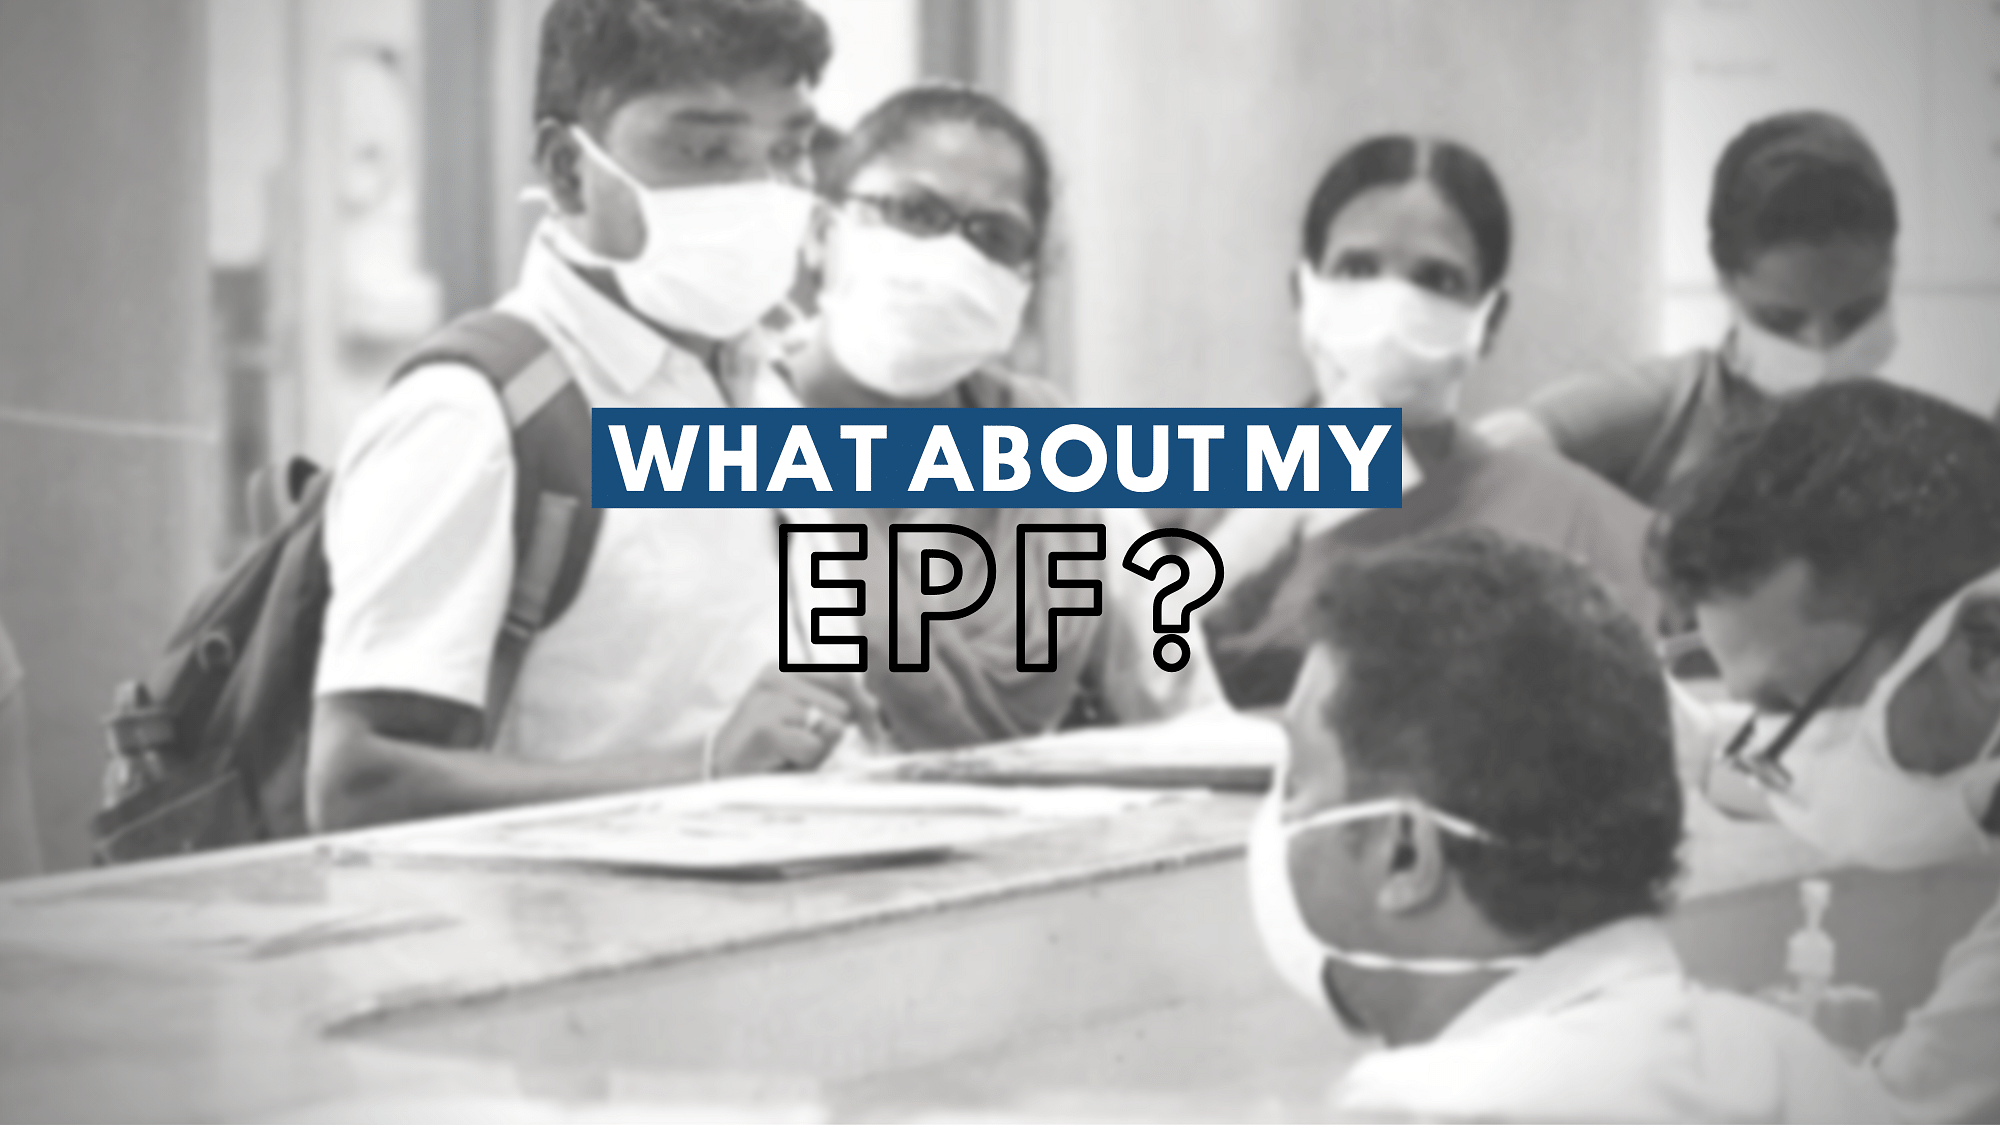 The Centre is amending the EPF scheme as part of efforts to combat the economic fallout of the coronavirus crisis.